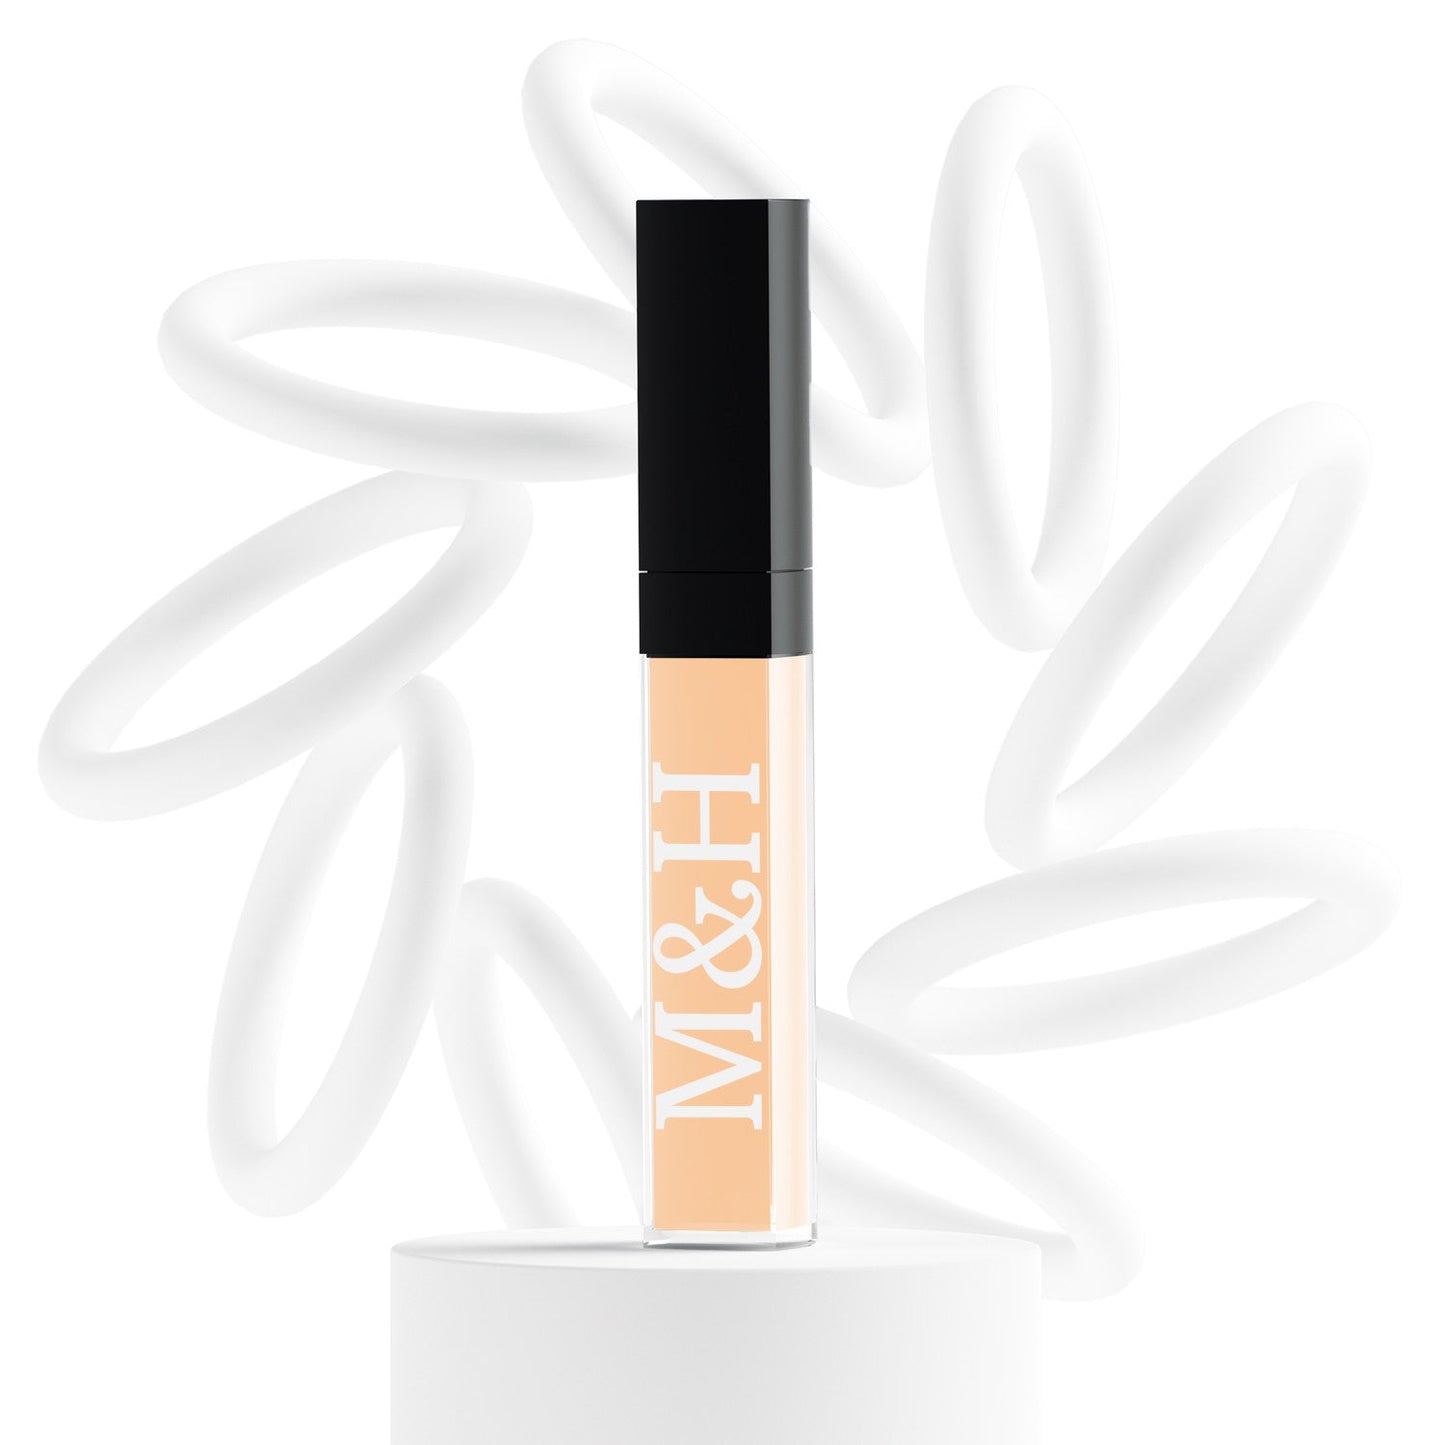 Vegan Concealers - M&H FashionVegan ConcealersconcealerM&H FashionM&H FashionConcealer-902PorcelainVegan ConcealersM&H FashionconcealerM&H Fashion This multifunctional concealer is designed to cover under-eye circles, complexion alterations, and major imperfections like scars, hyperpigmentation, burns, and tatVegan Concealers